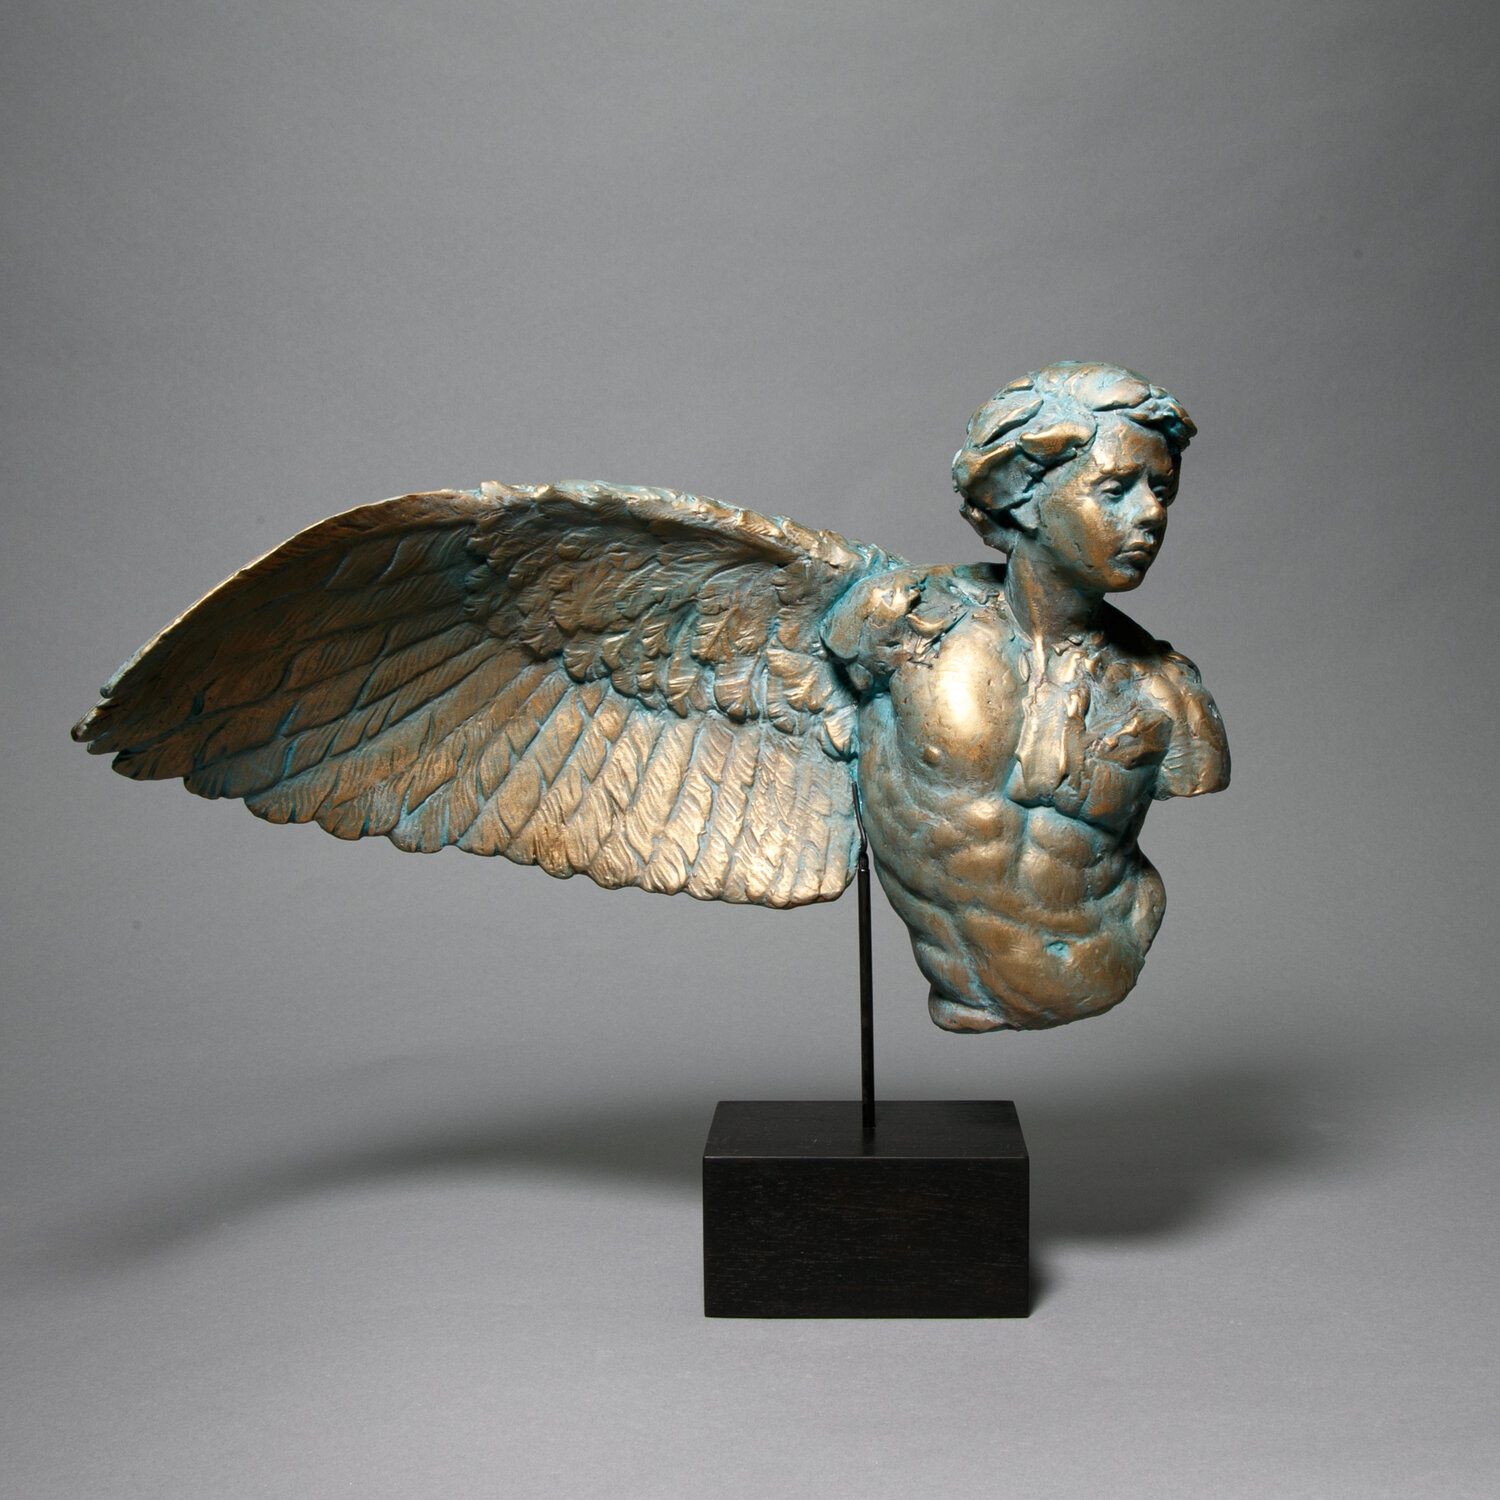 13-captivating-facts-about-the-icarus-sculpture